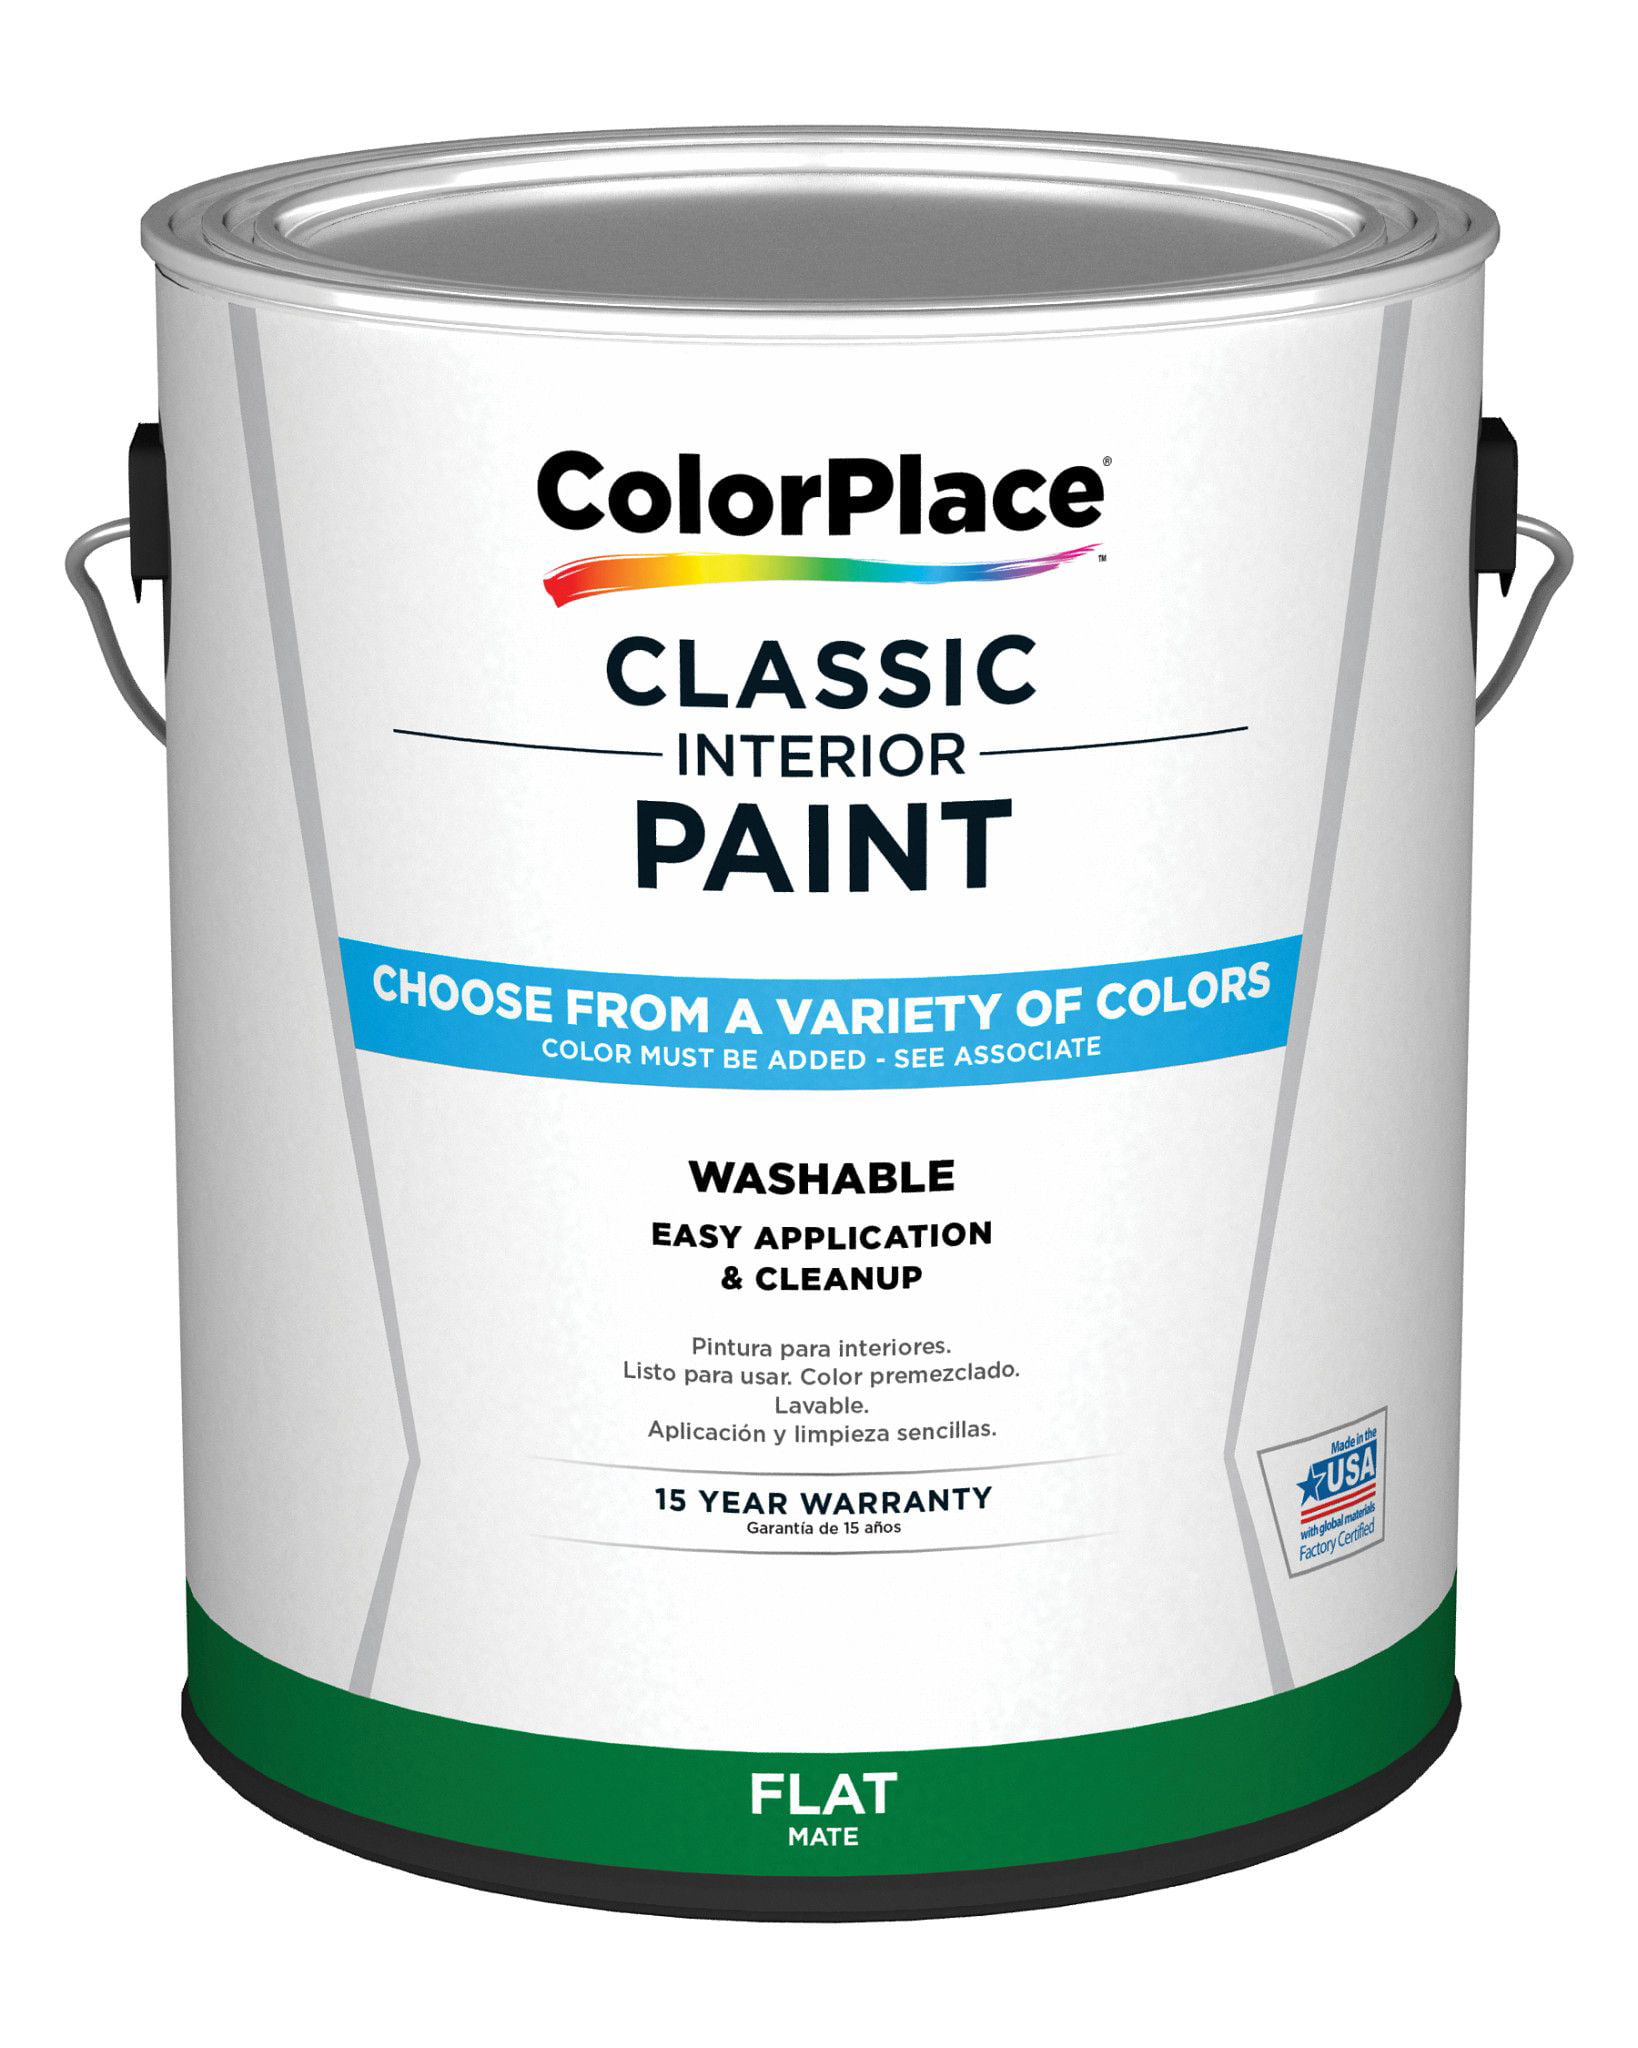 ColorPlace Classic Interior Wall & Trim Paint, Le Chateau Brown